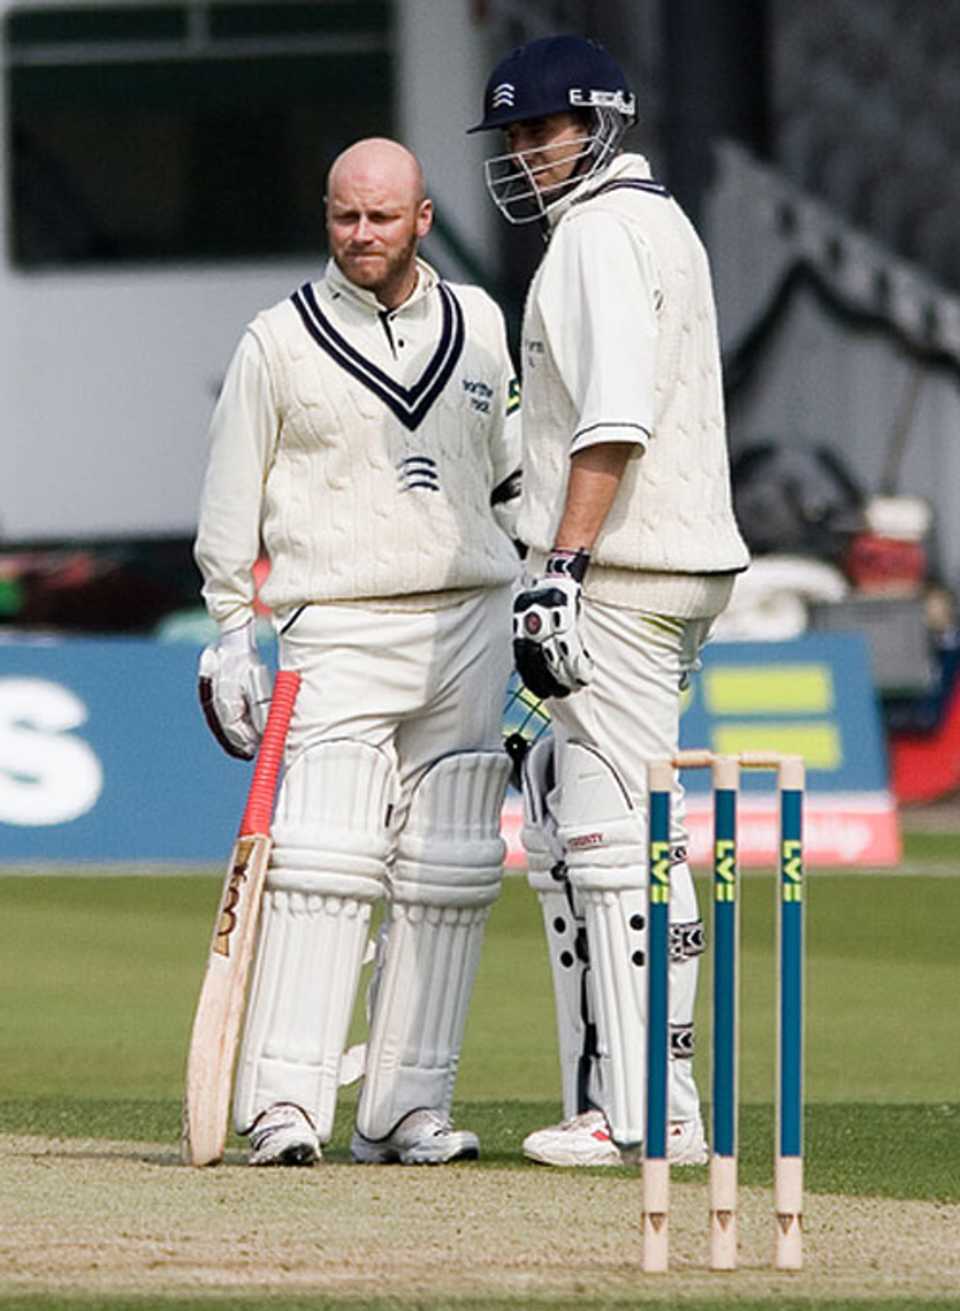 David Nash on his way to his third hundred in three games, Middlesex v Northamptonshire, Lord's, April 27